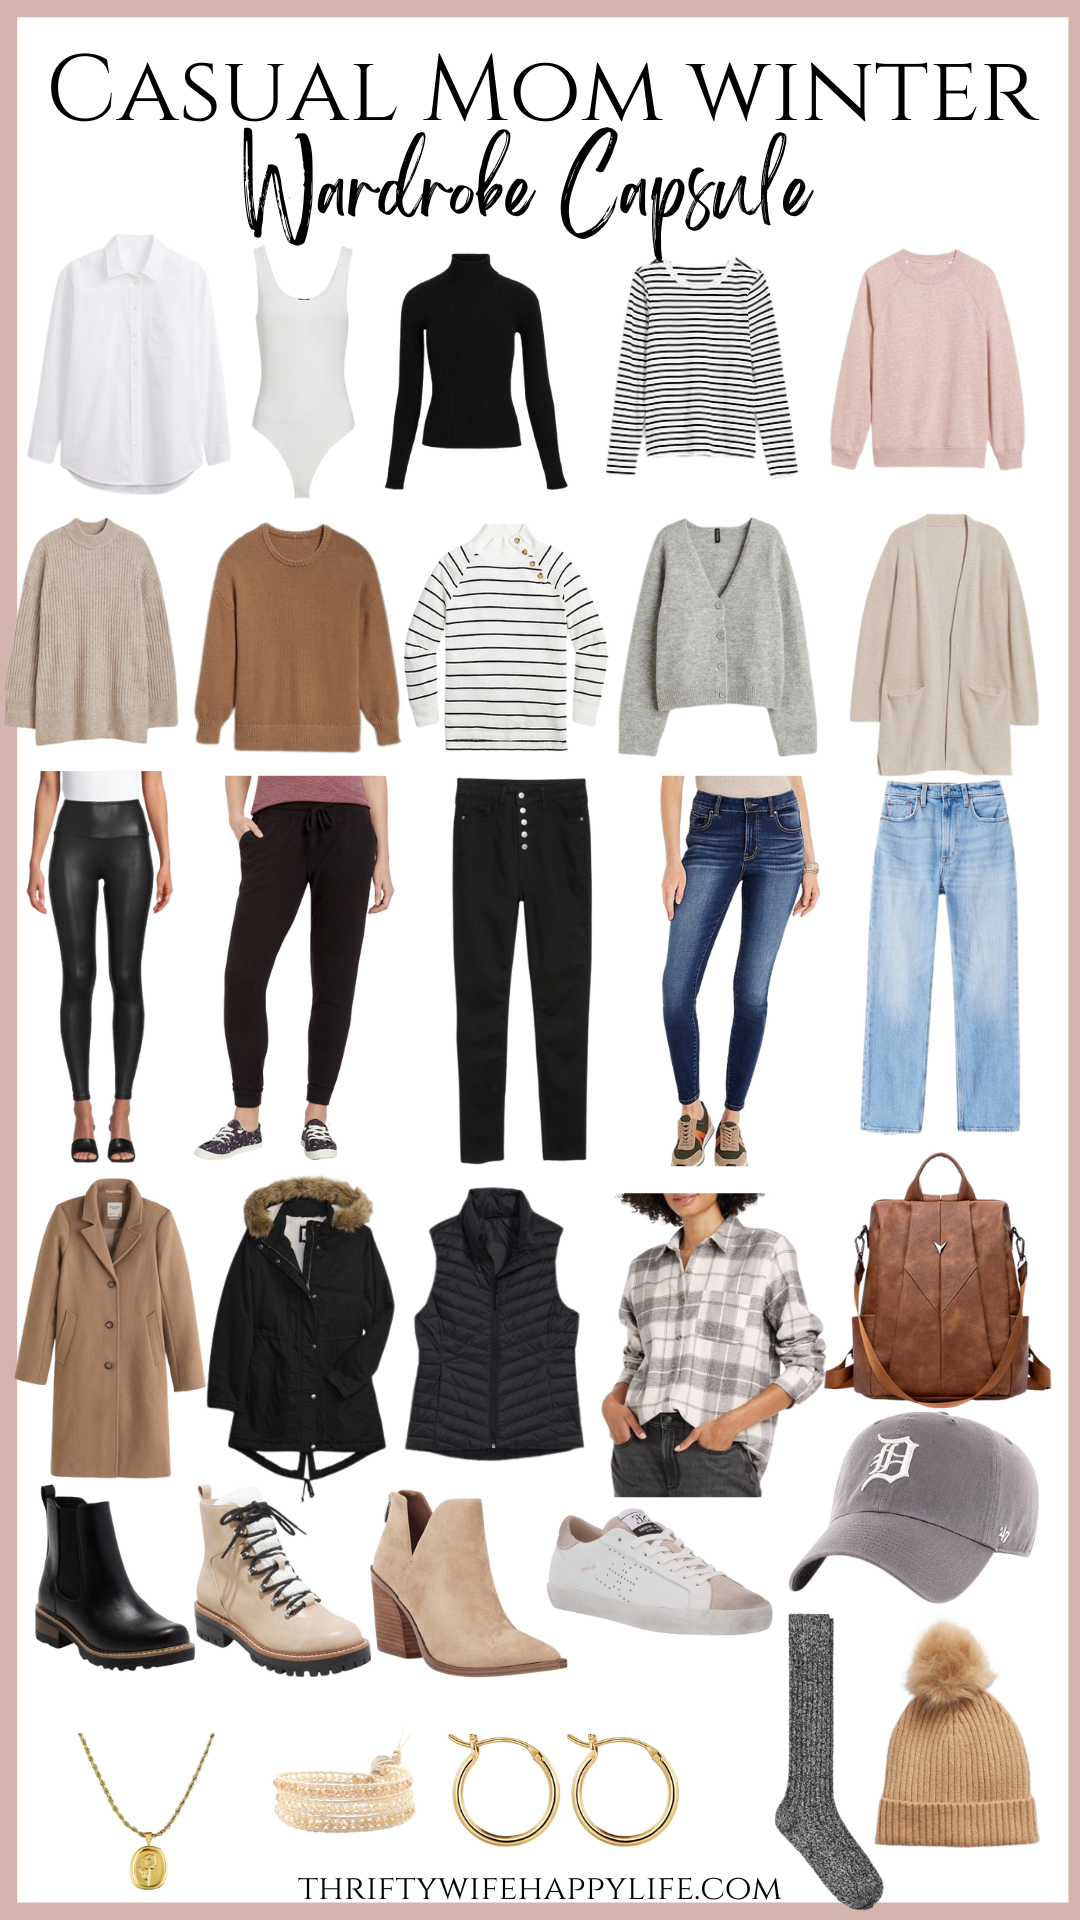 How to Build a Winter Capsule Wardrobe You Love